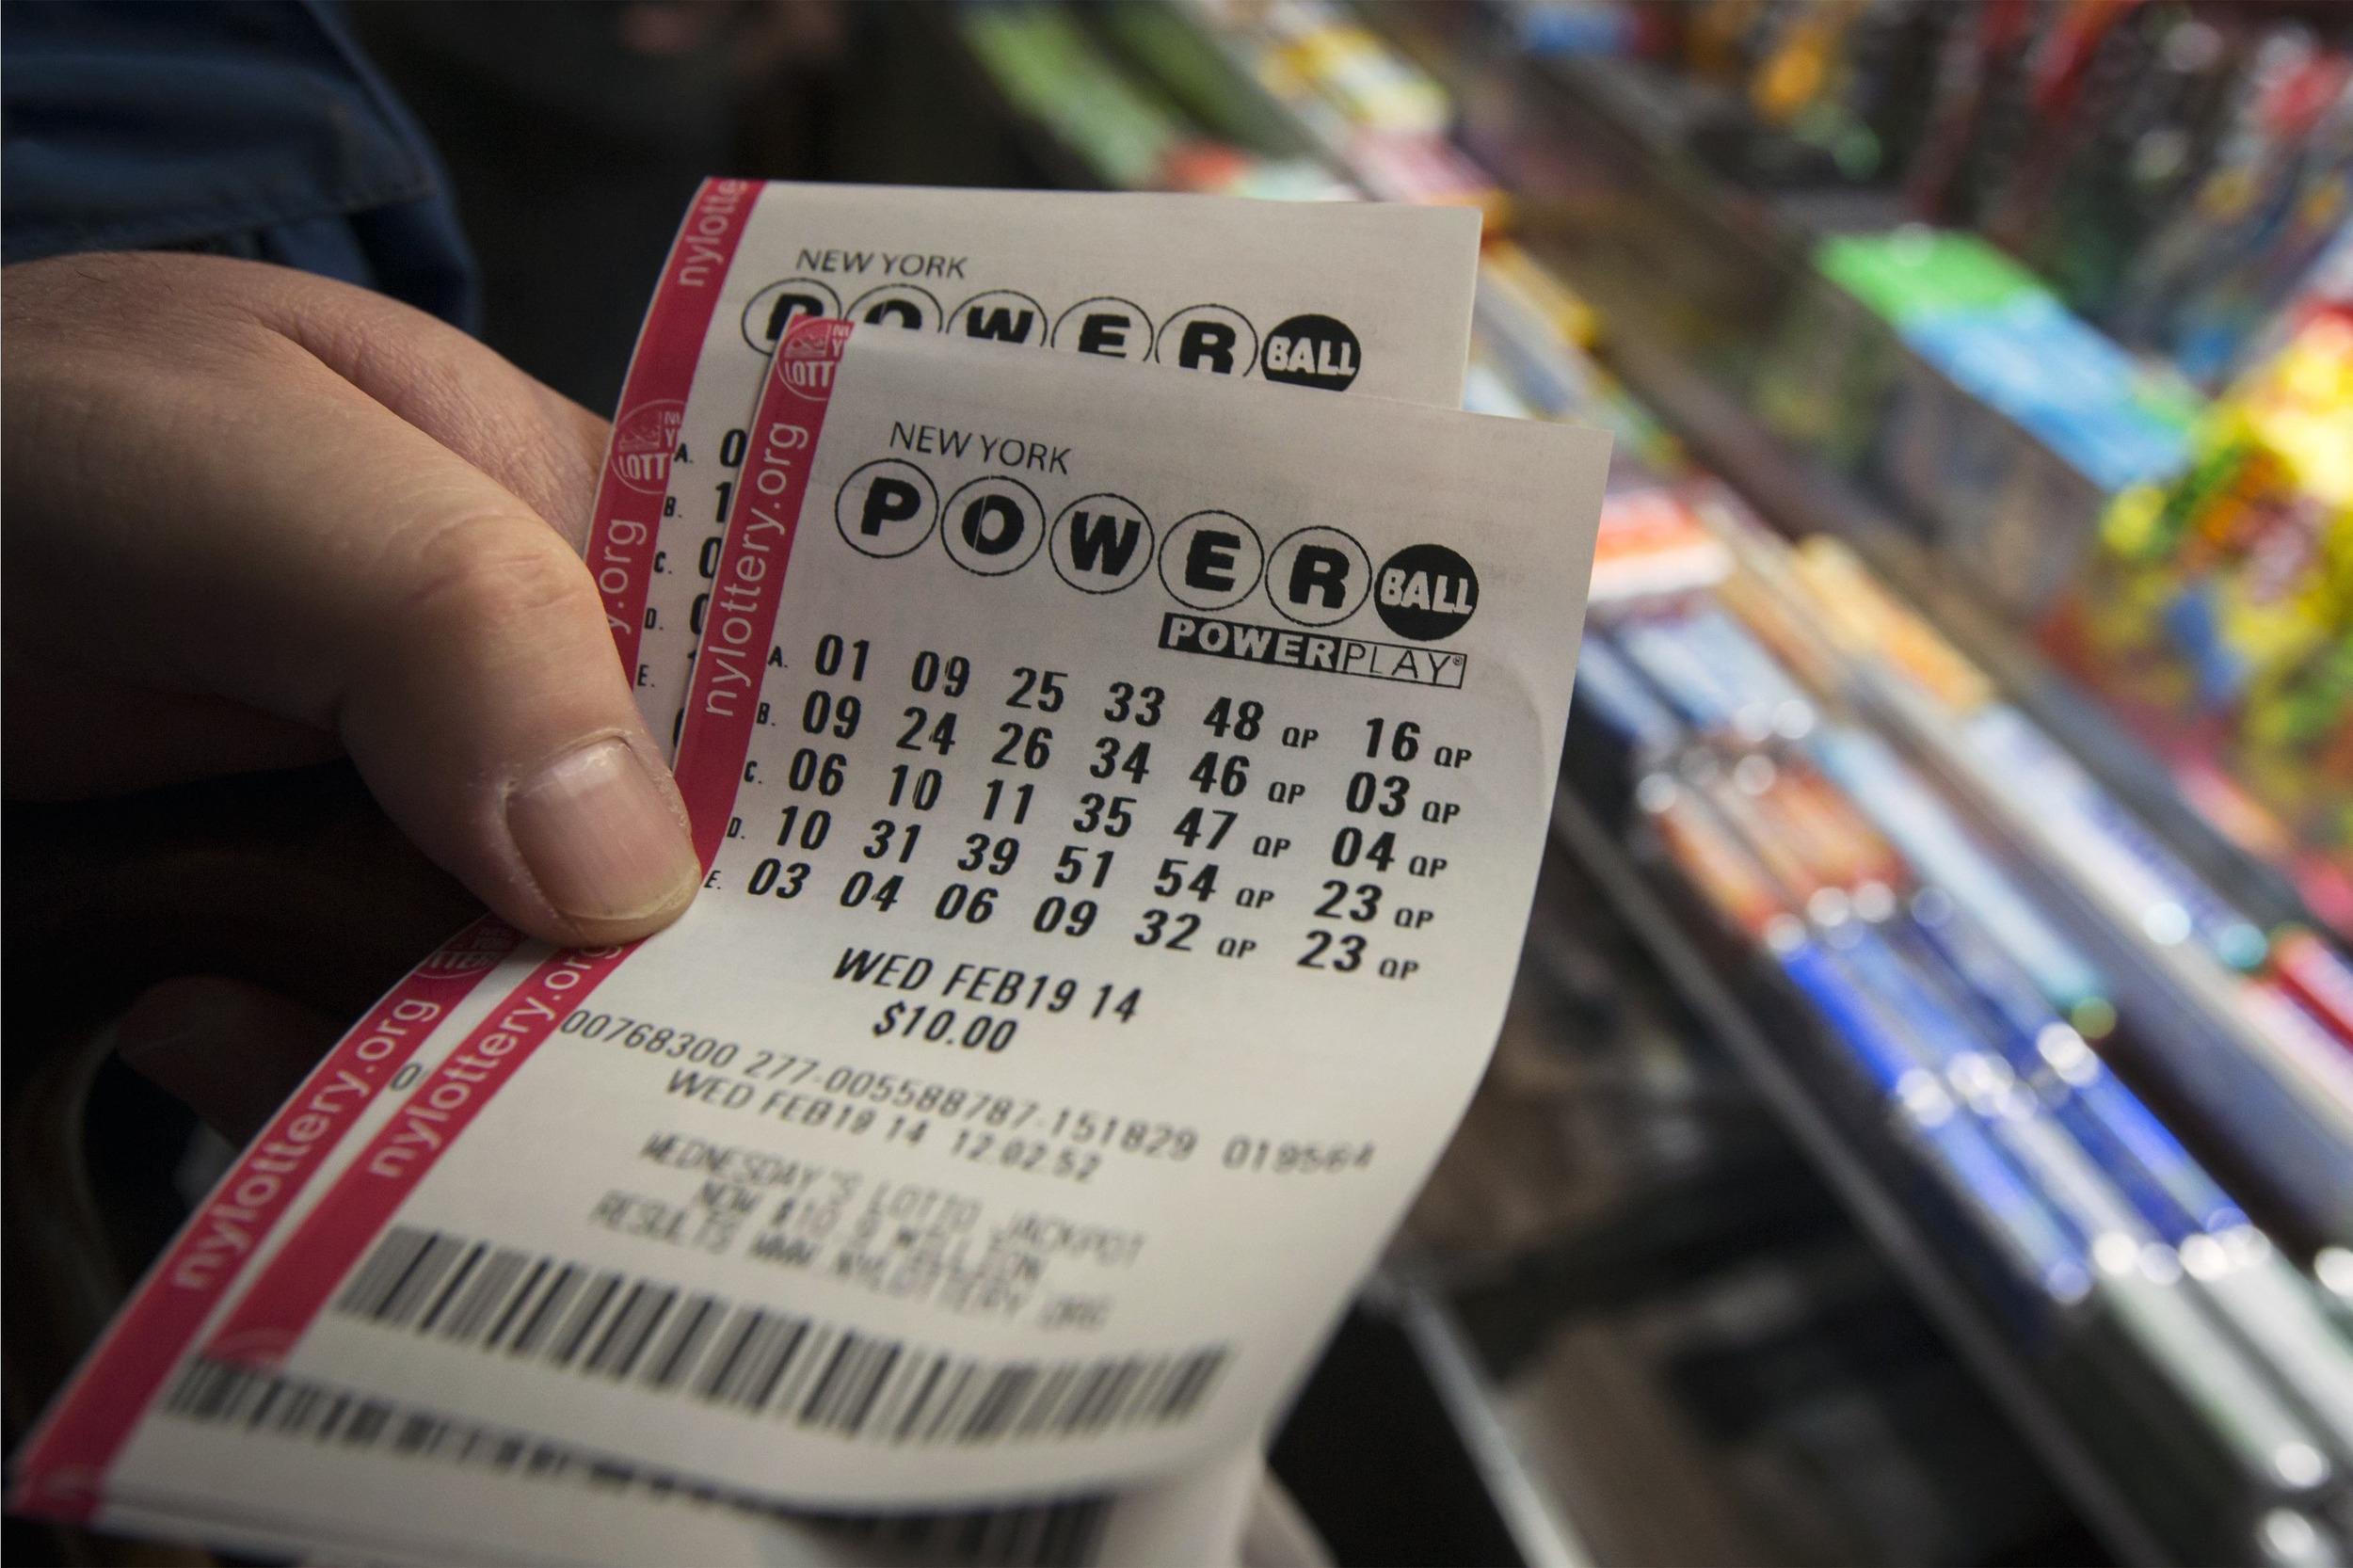 The US Powerball Jackpot is now $300 million